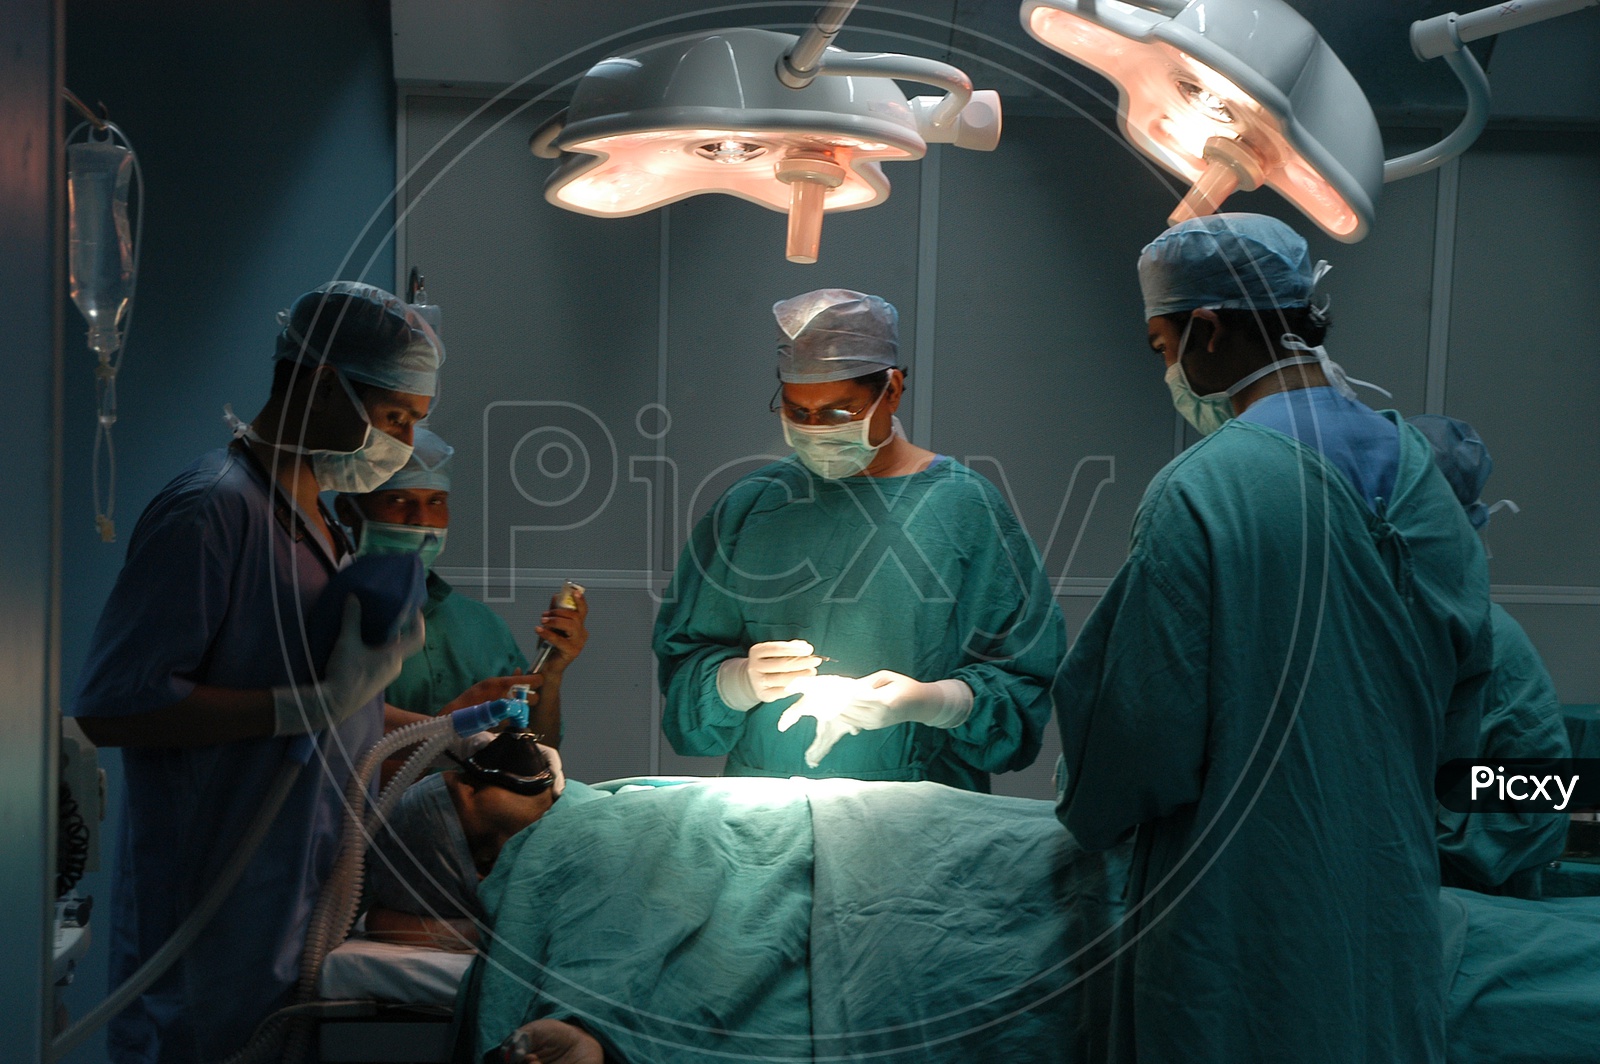 Surgeon team performing a surgery in operating theater